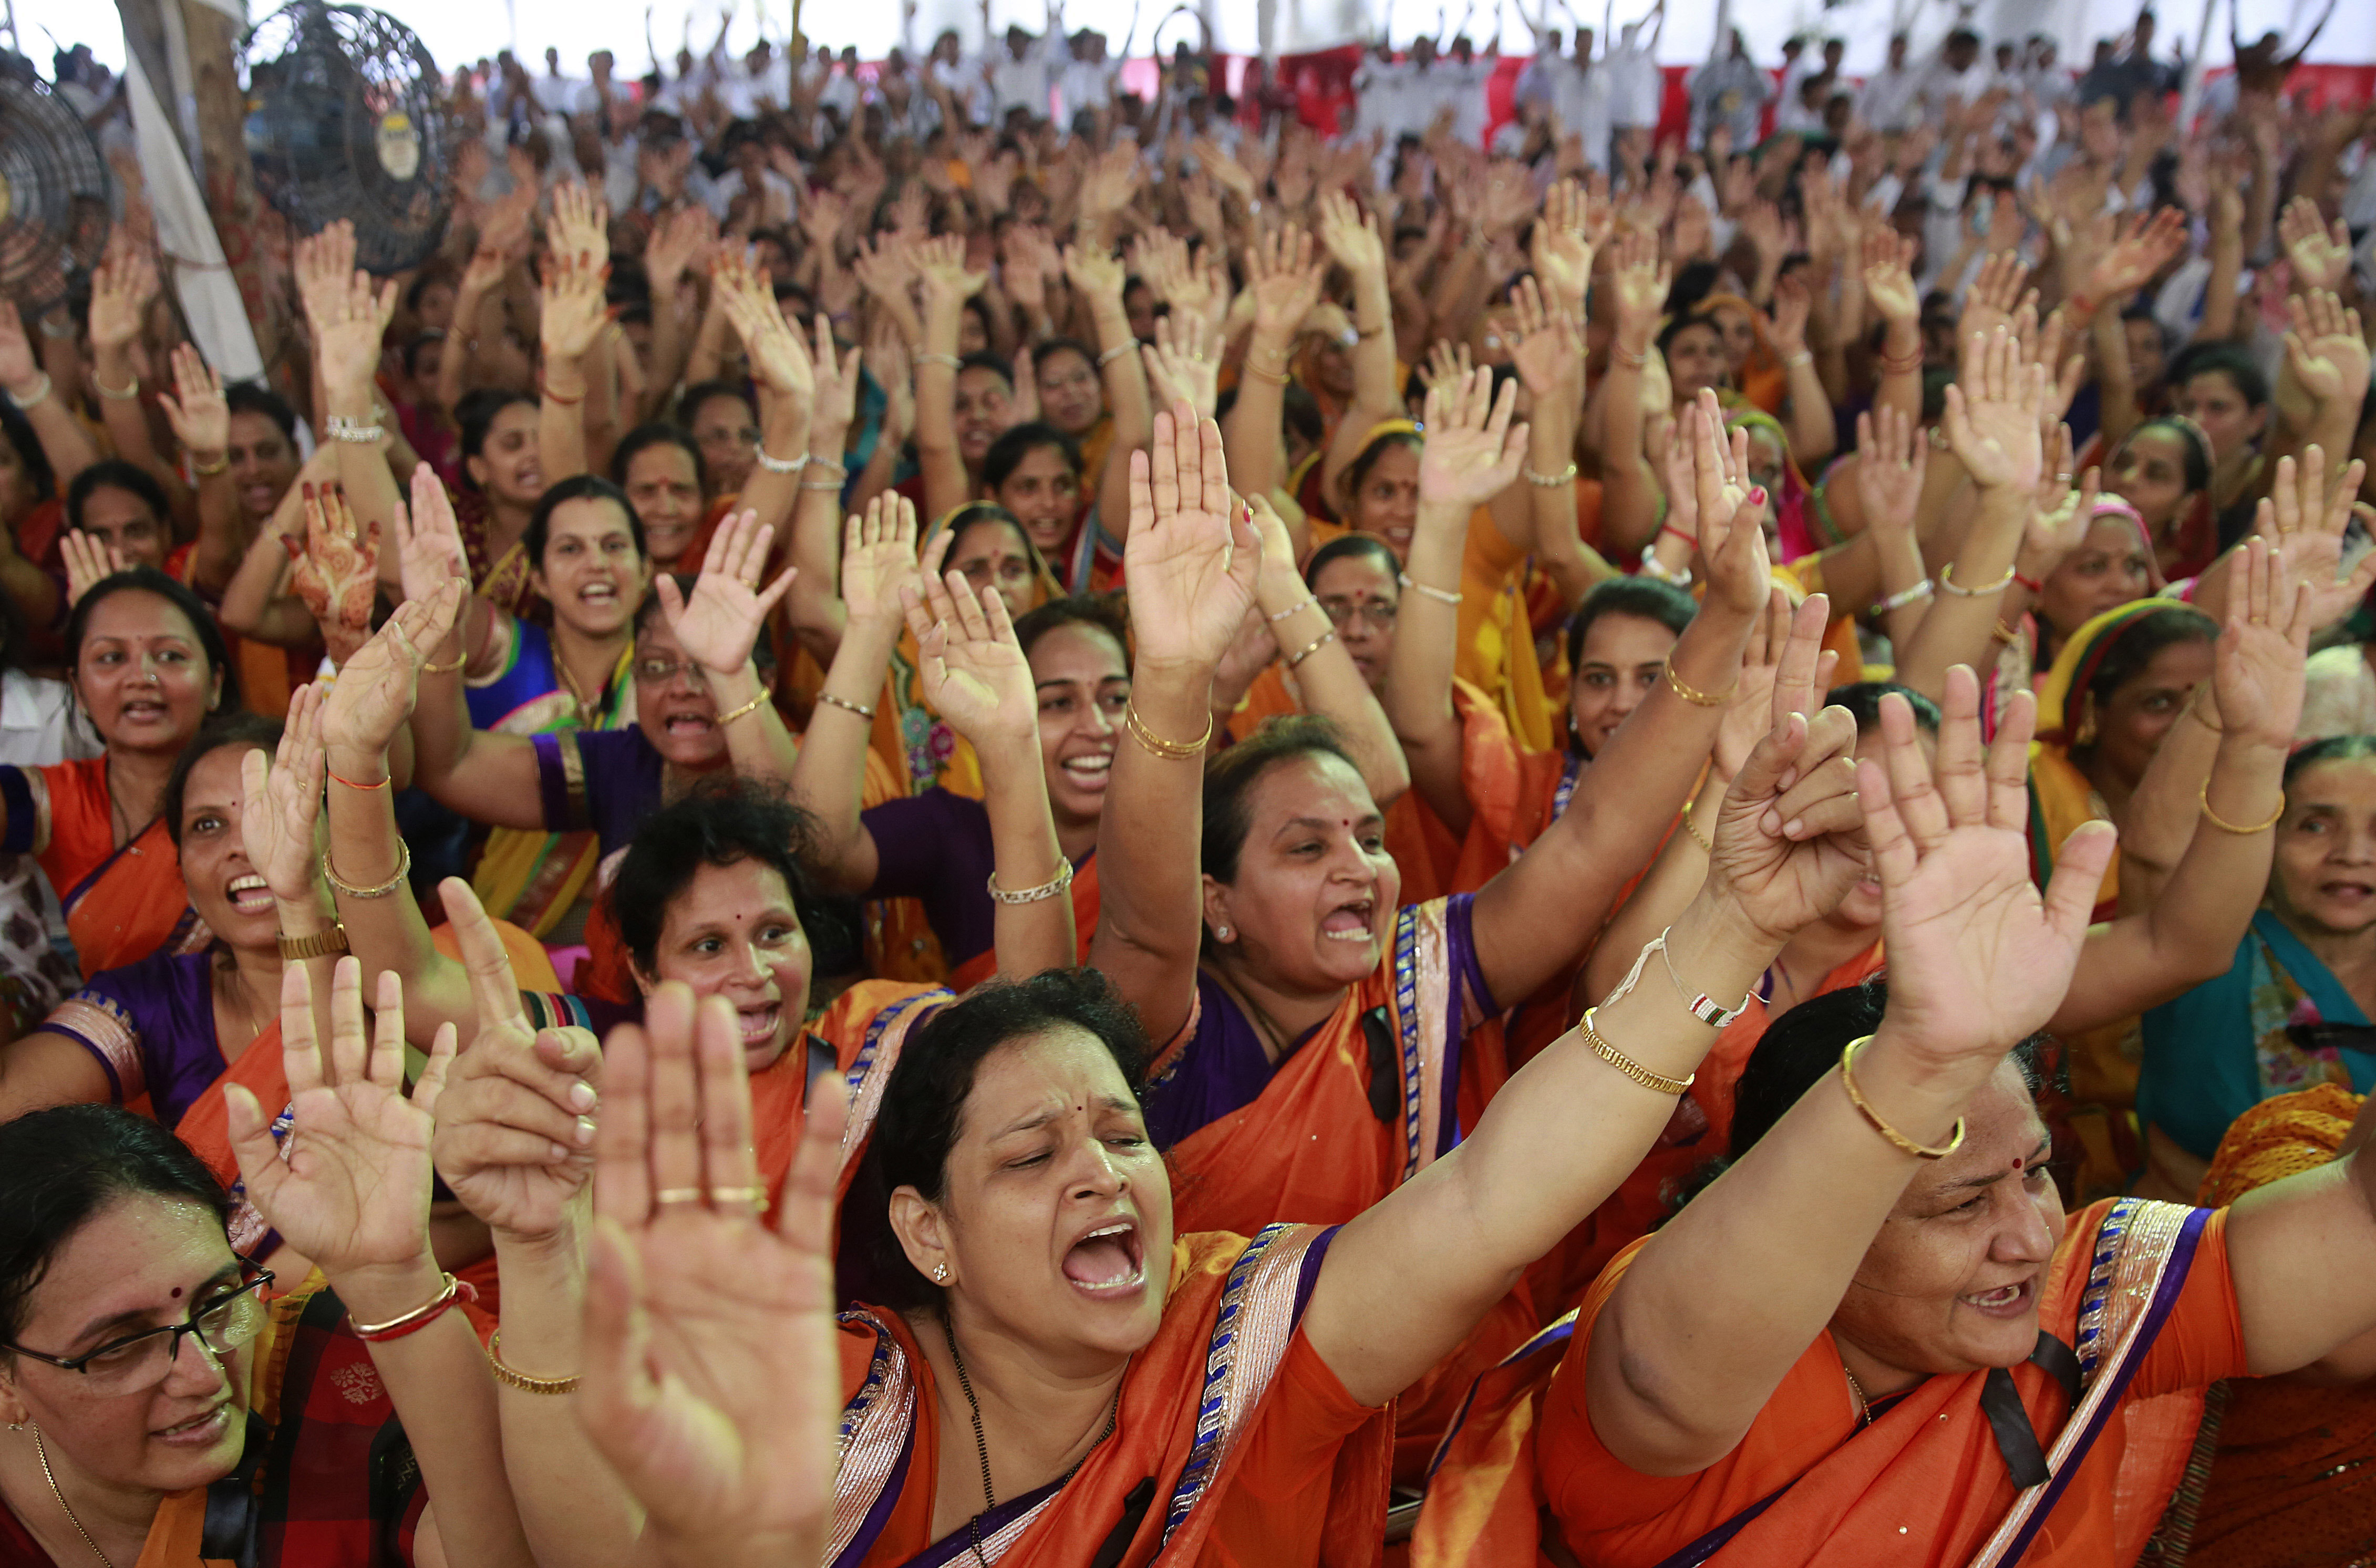 Members of the Jain community shout slogans during a protest of the recent Rajasthan High Court order banning the religious practice of Santhara, a practice of fasting unto death, in Mumbai on Aug. 24, 2015. (Rafiq Maqbool—AP)